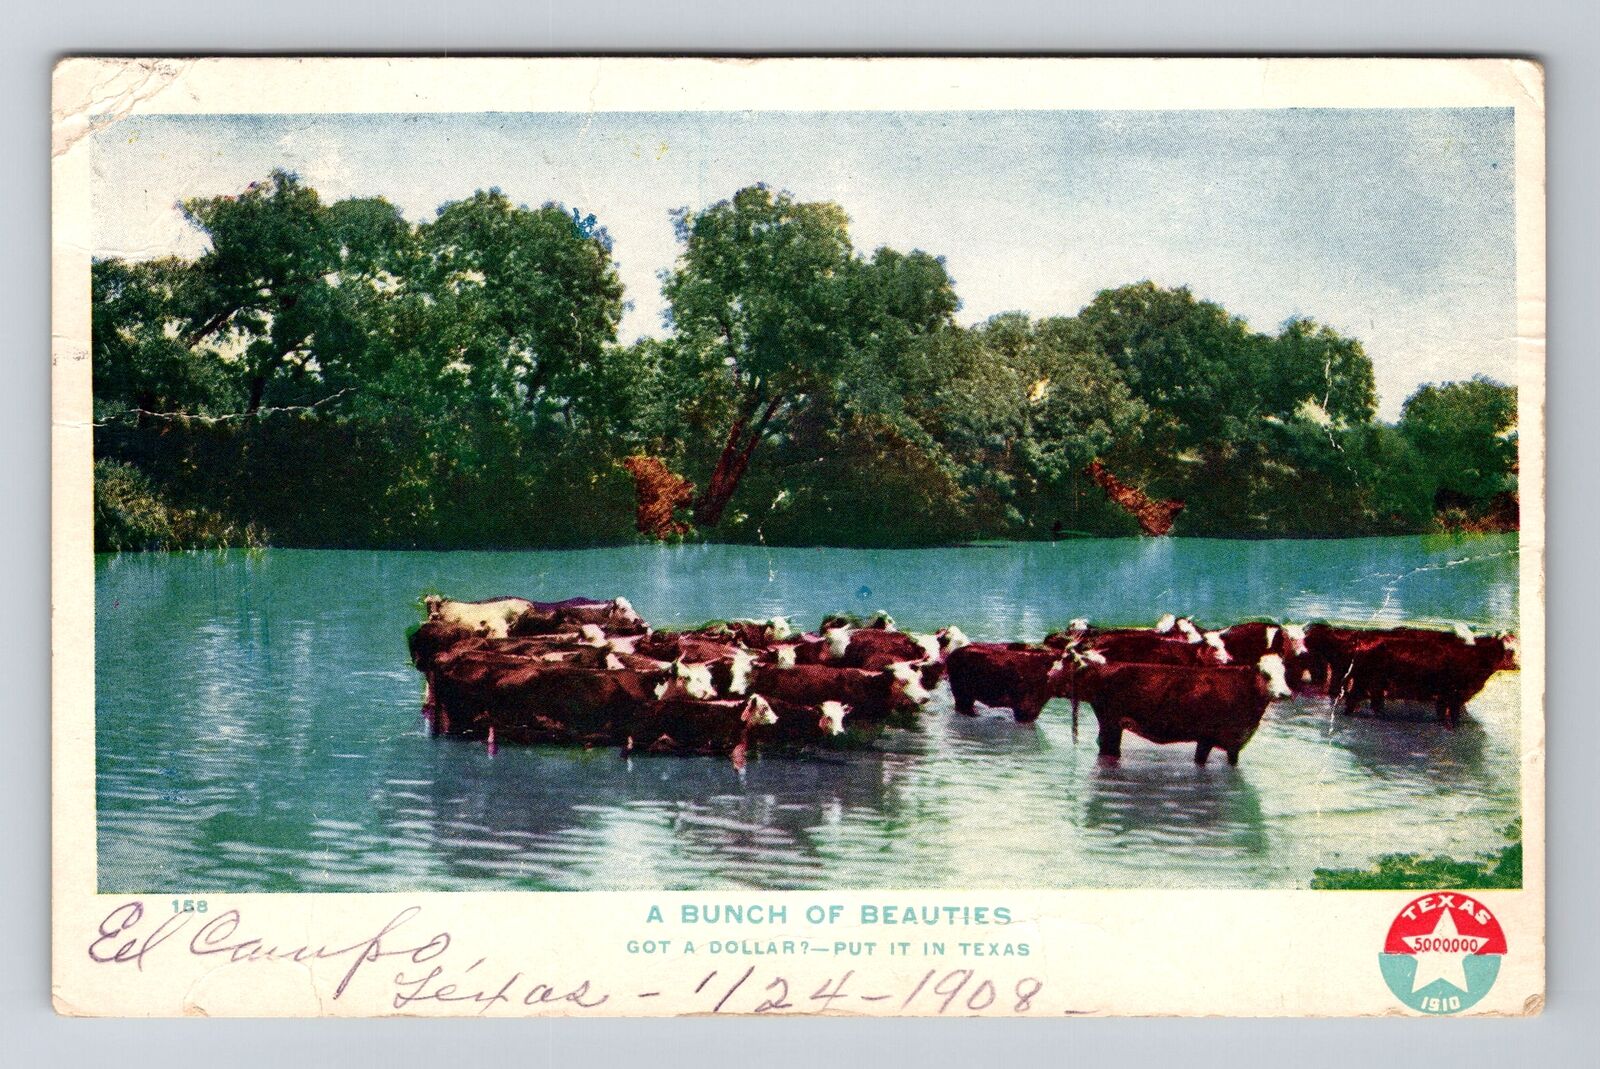 El Campo TX-Texas, A Bunch Of Beauties, Cattle In River, Vintage c1908 Postcard